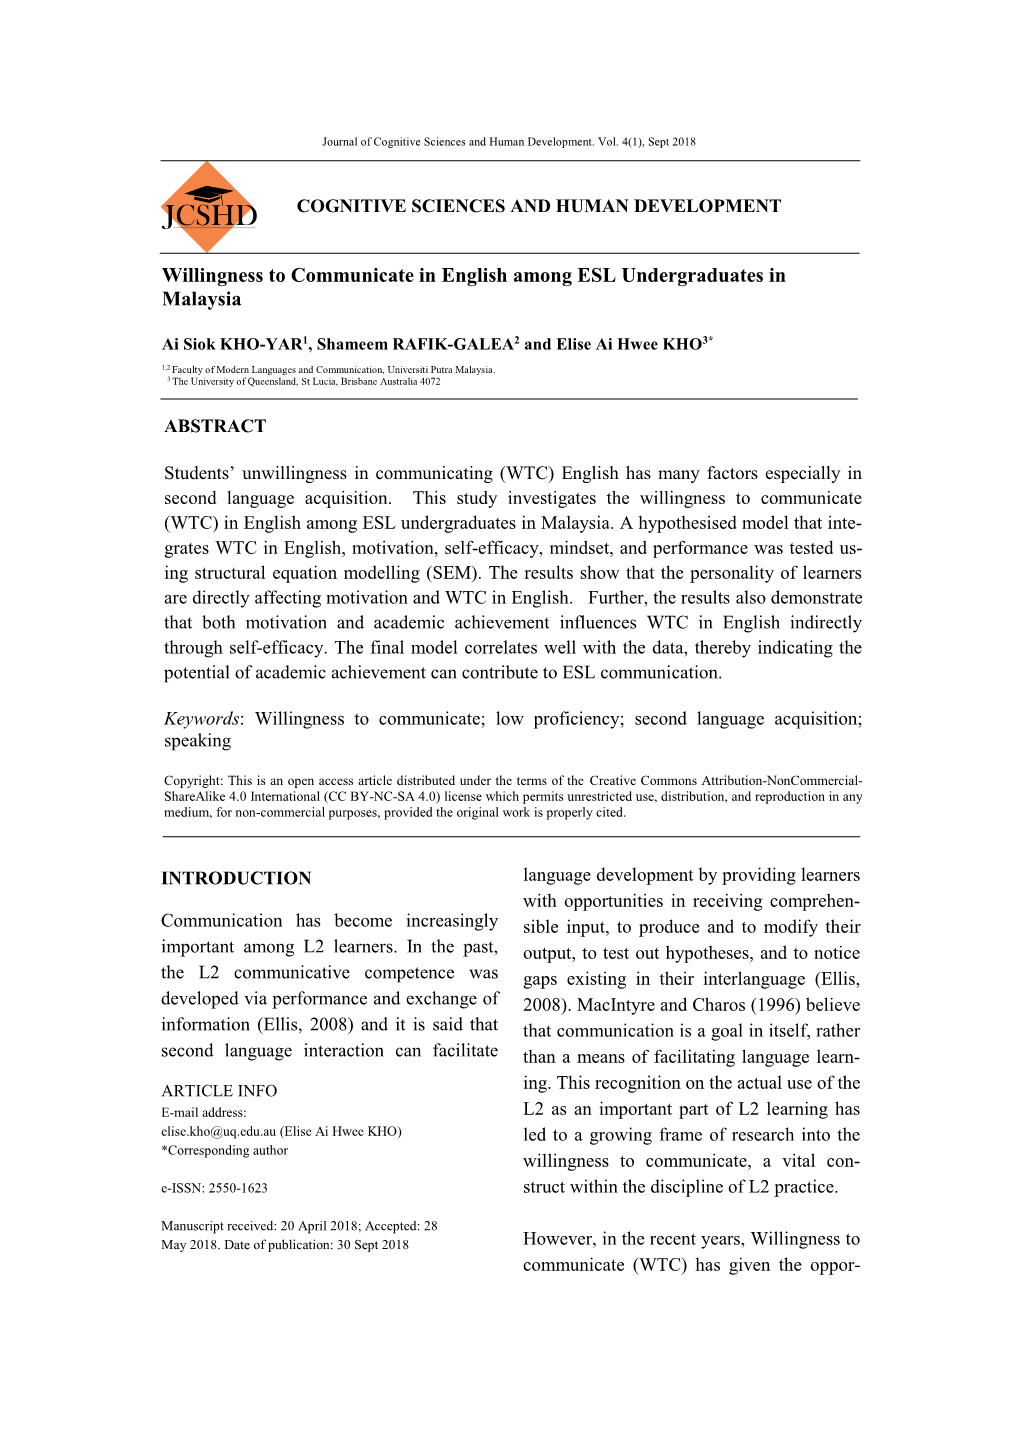 Willingness to Communicate in English Among ESL Undergraduates In